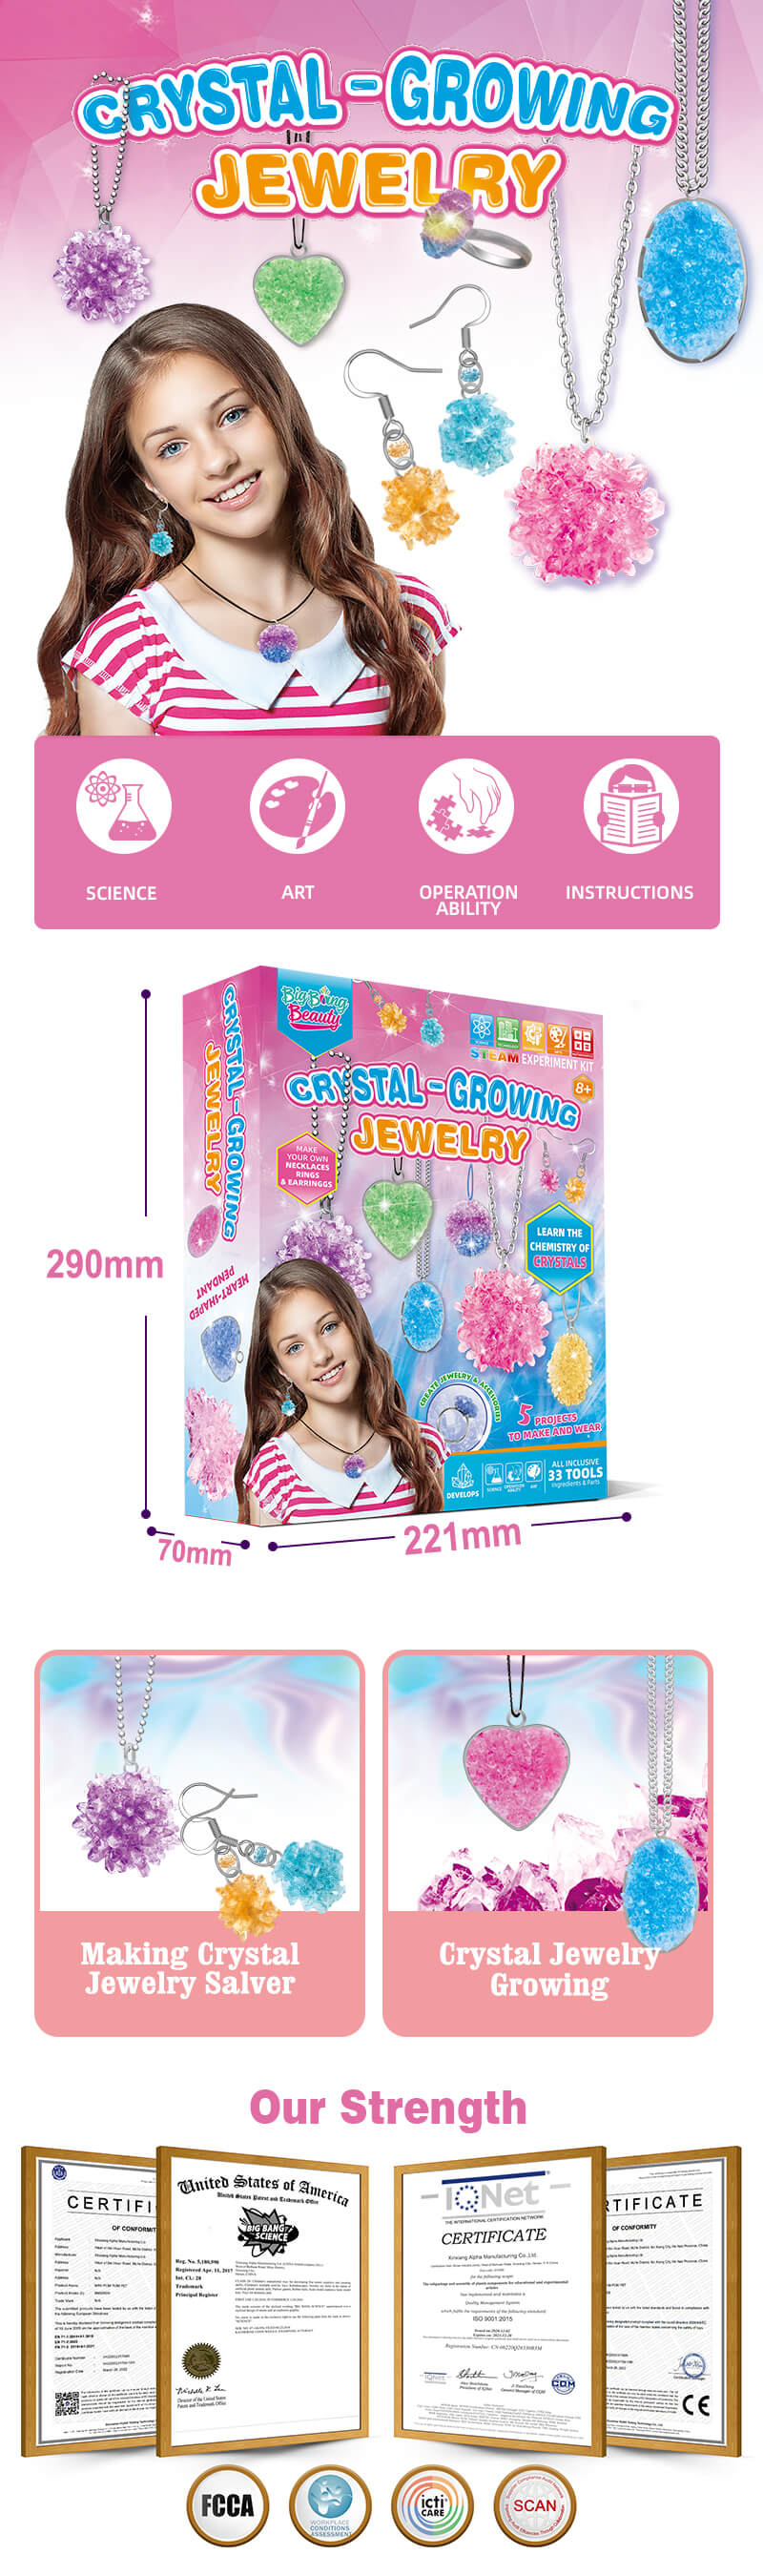 Crystal-Growing-Jewelry-Kit-Product-details-drawing